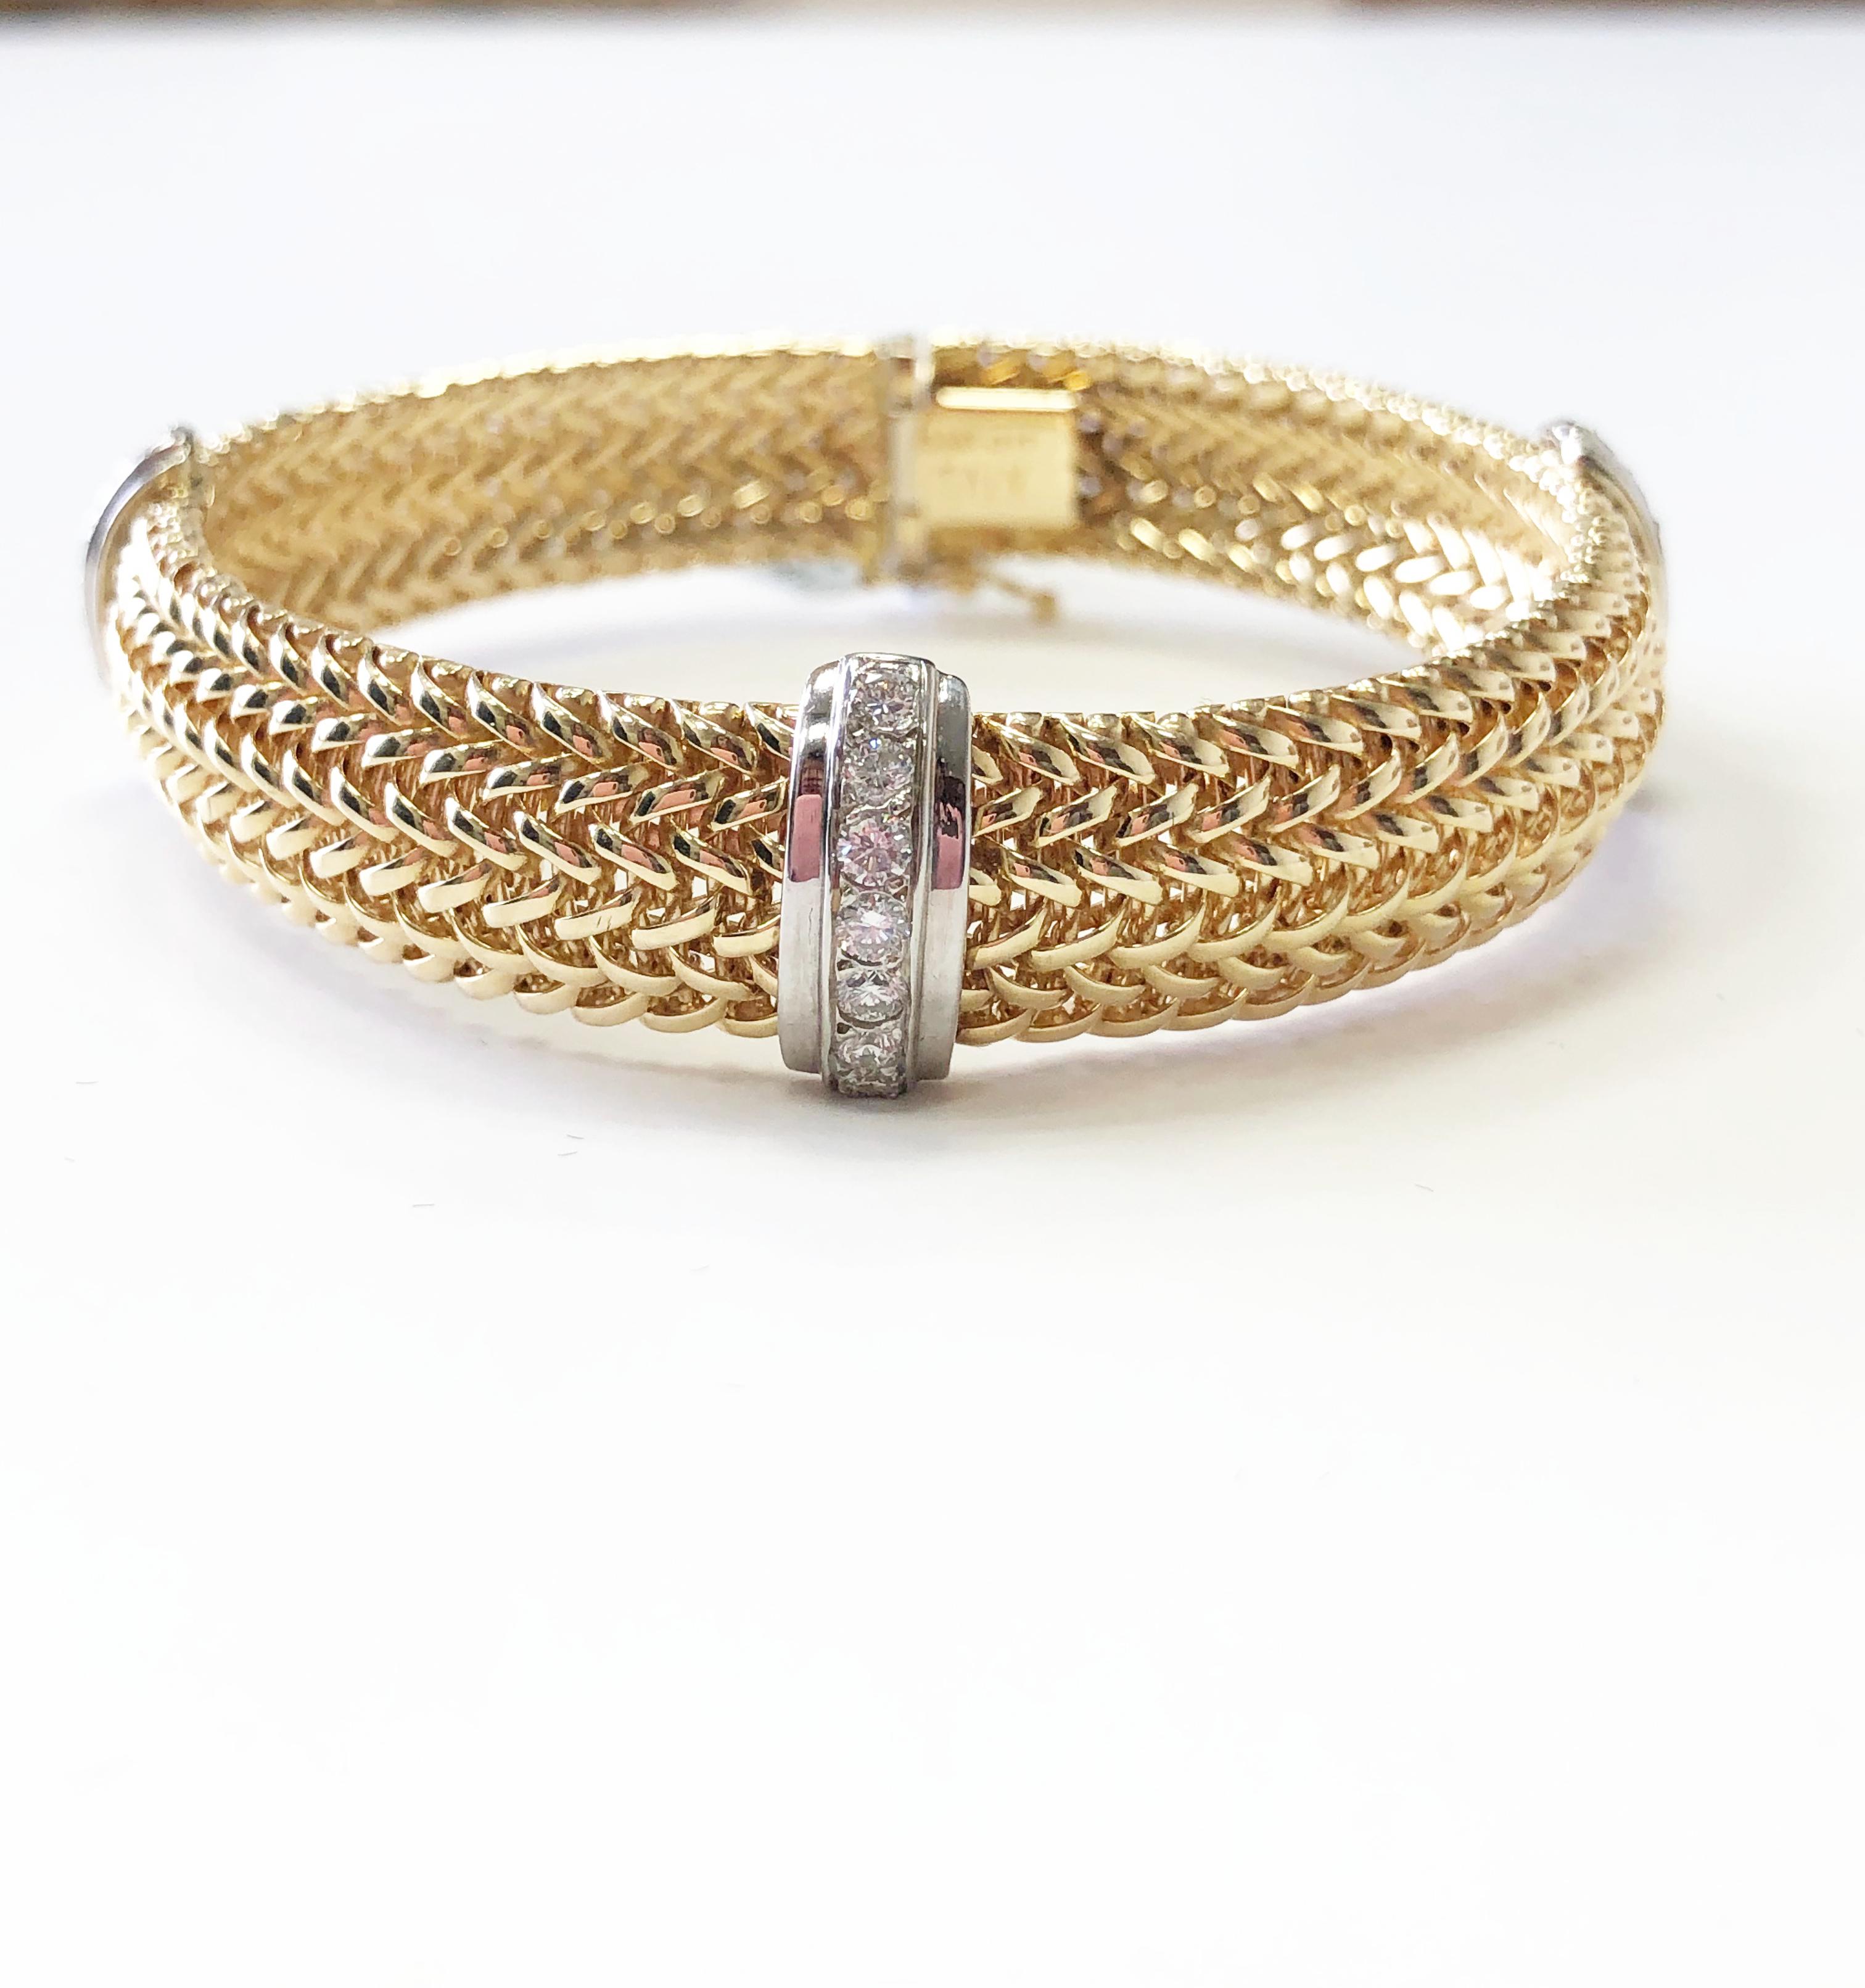 Beautiful white diamond and 2 tone 14k yellow gold and white gold bracelet.  1.00 carats of white bright good quality diamond rounds in a classic design.  Handmade and 7.25